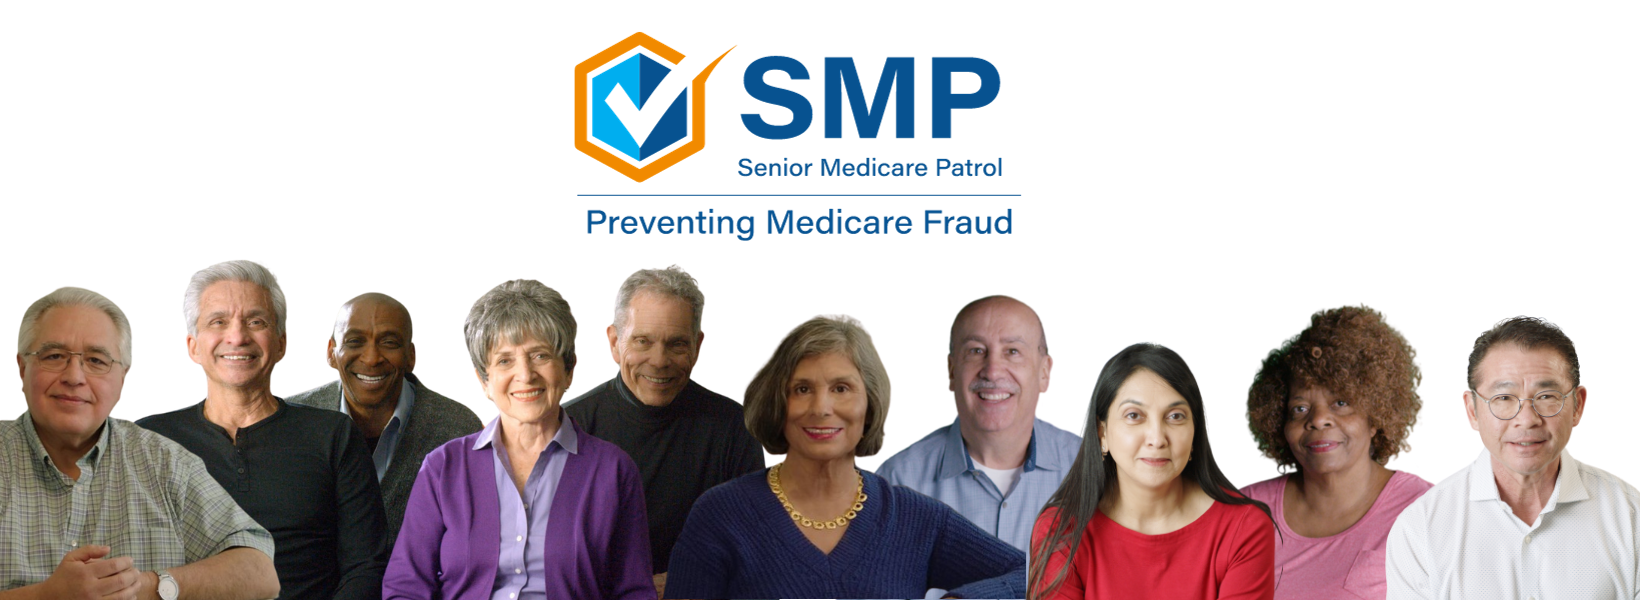 Group of people smiling with the SMP logo